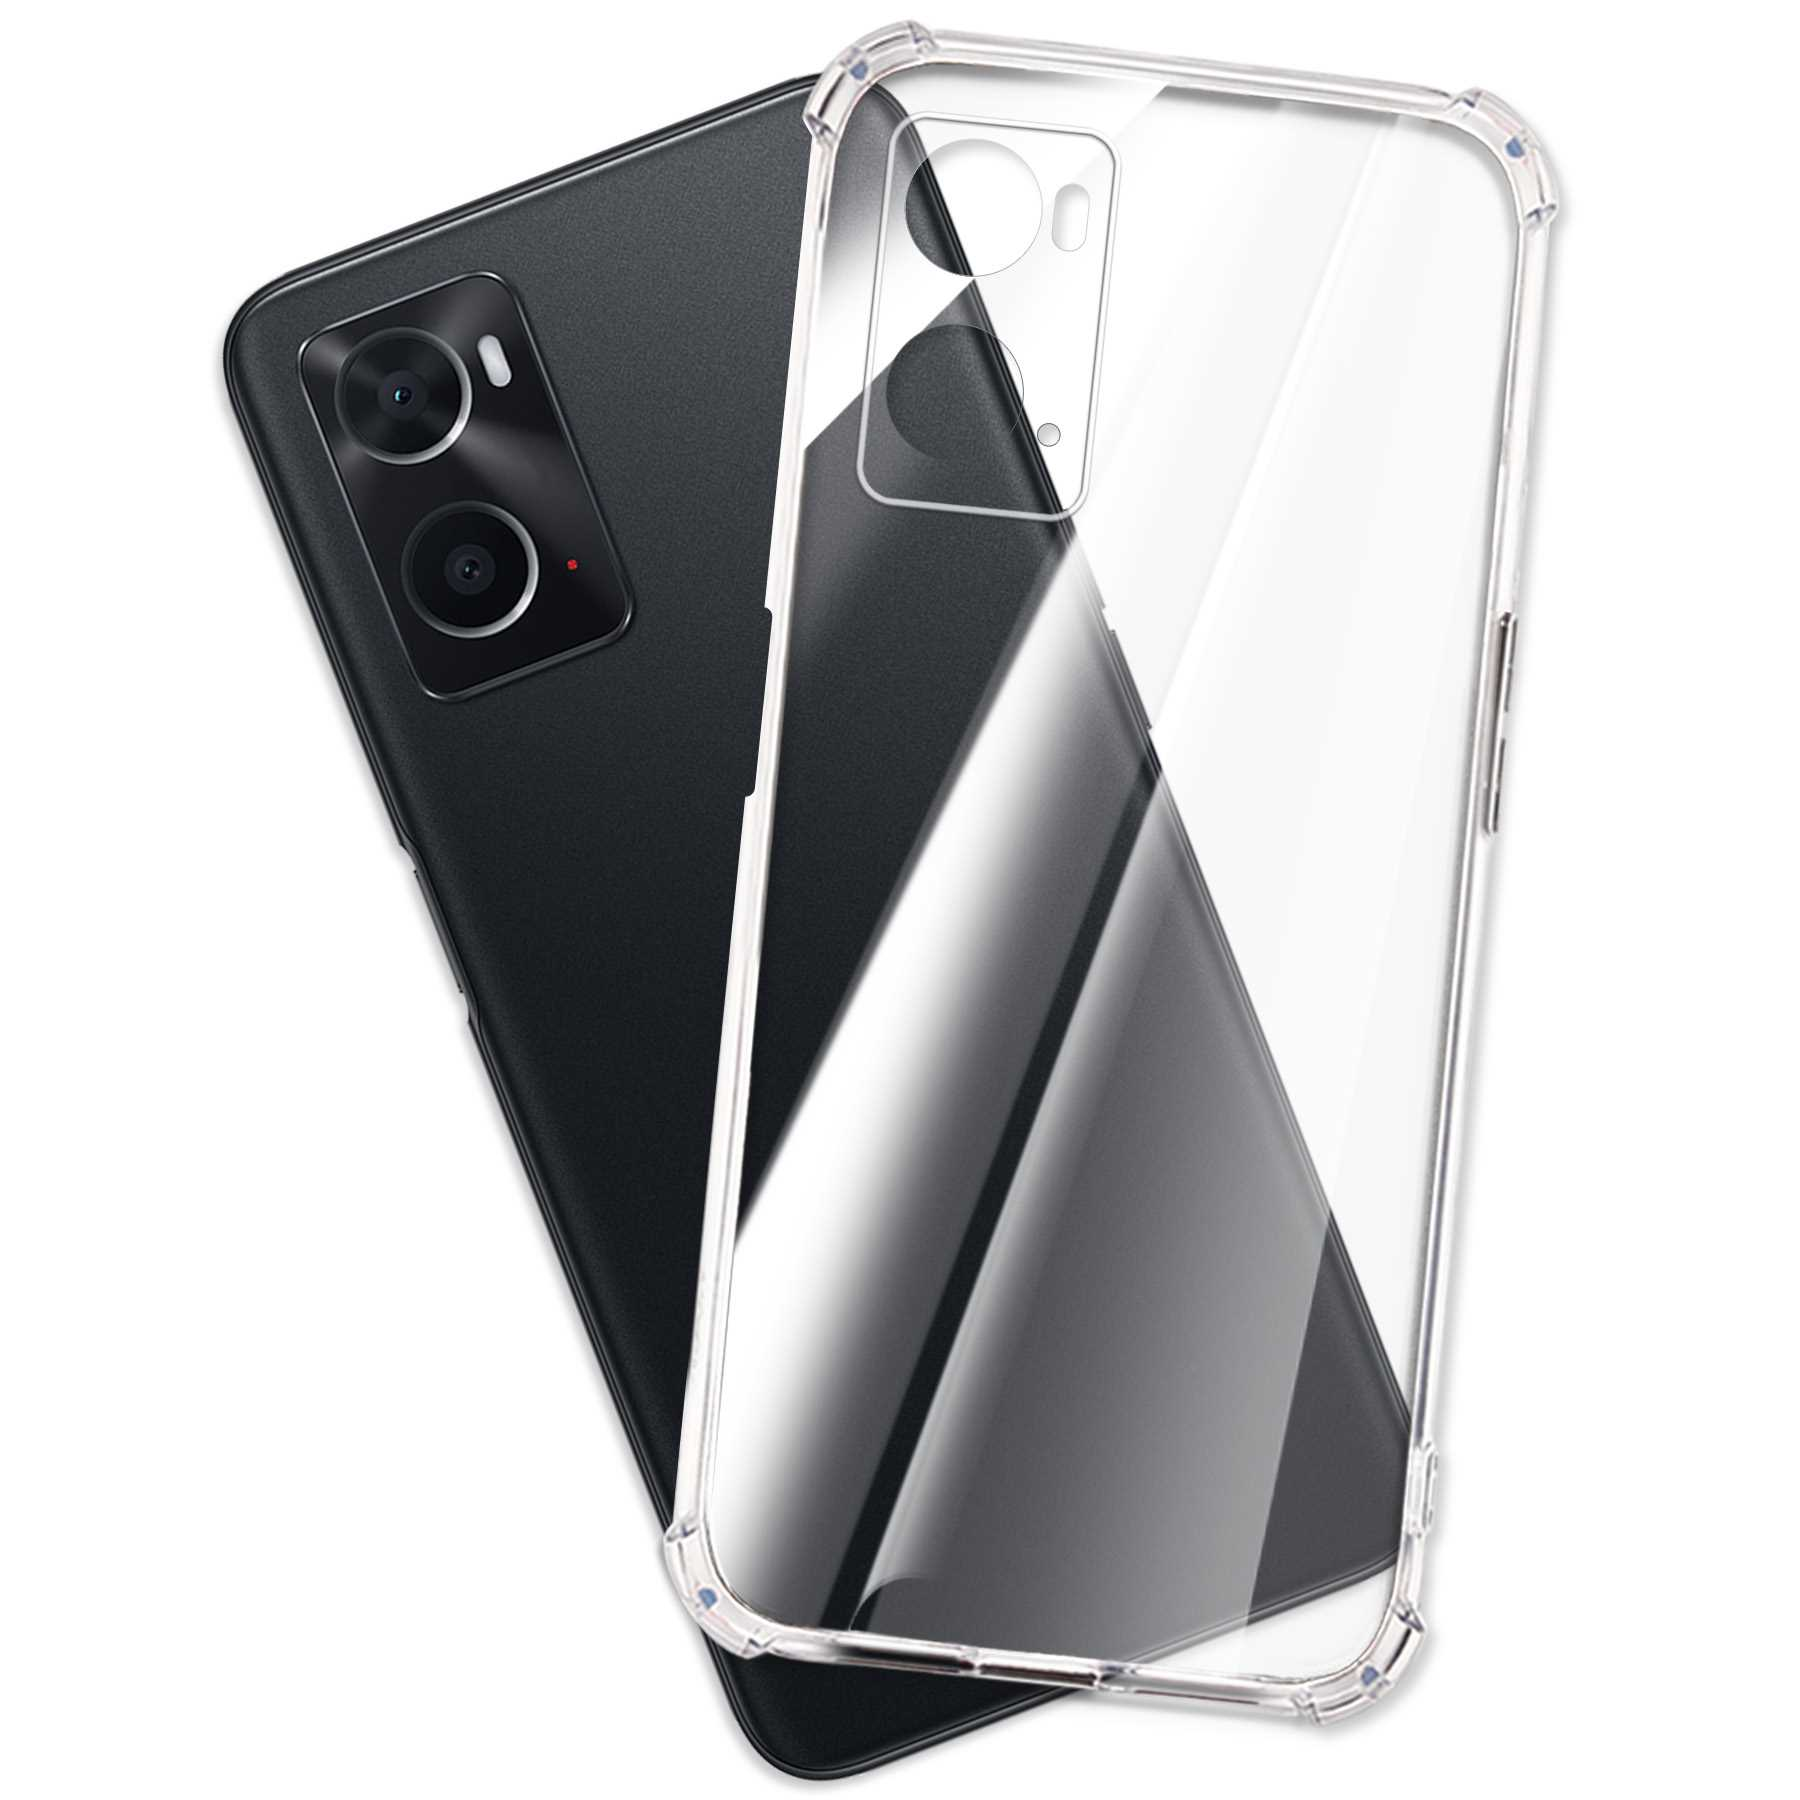 MTB MORE Backcover, A96, Oppo, Clear Transparent Case, Armor A76, ENERGY